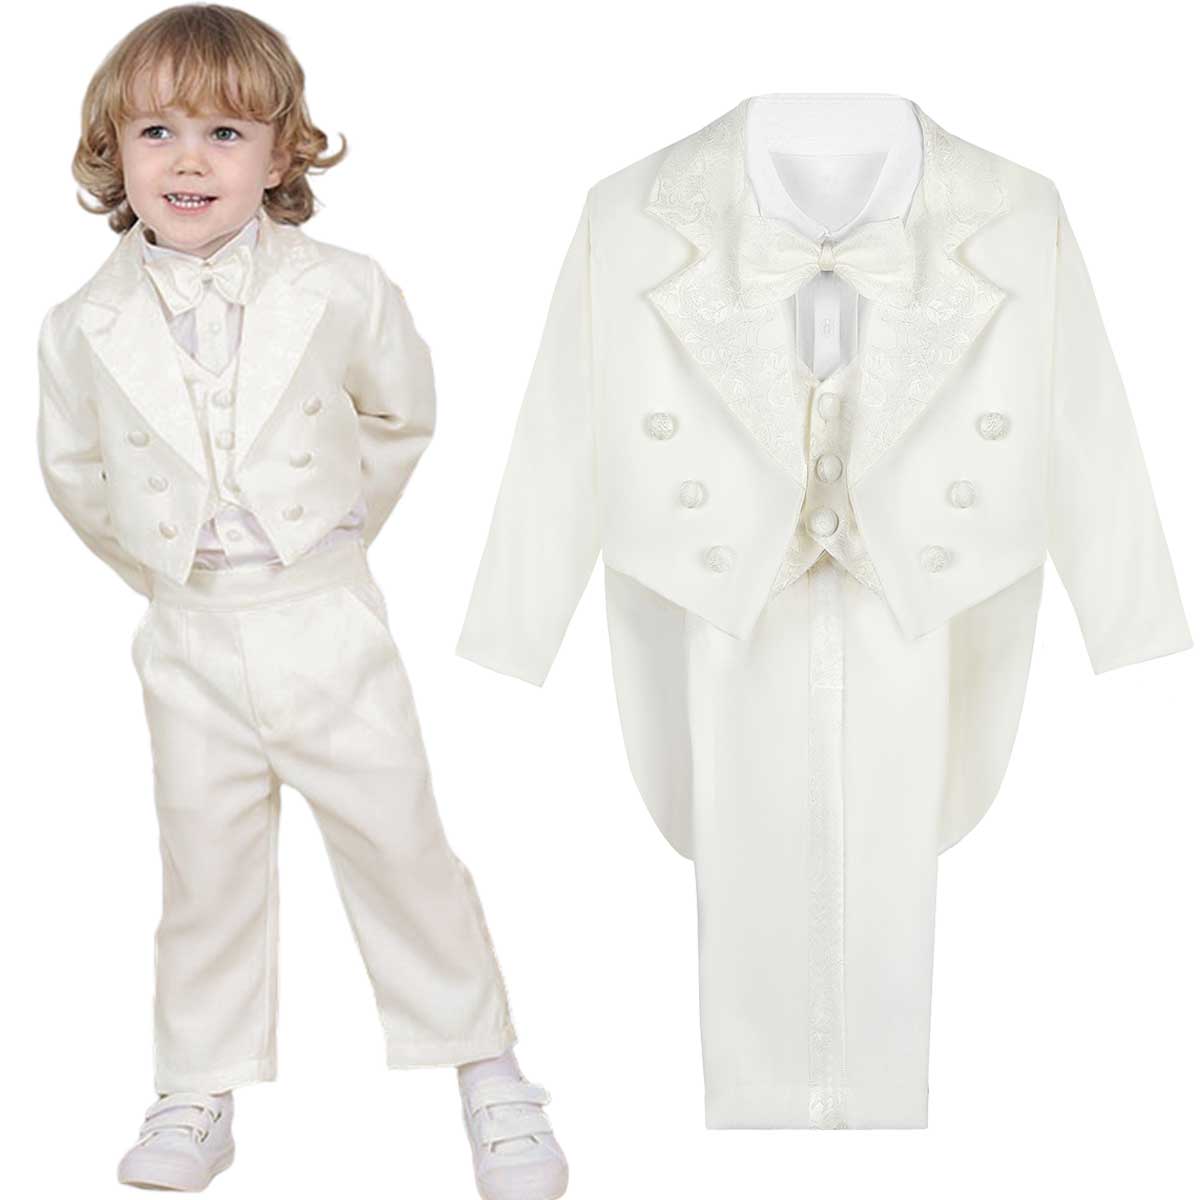 A&J DESIGN Toddler Boys Baptism Outfits Tuxedo Formal Wedding Party Suits Set with Tail